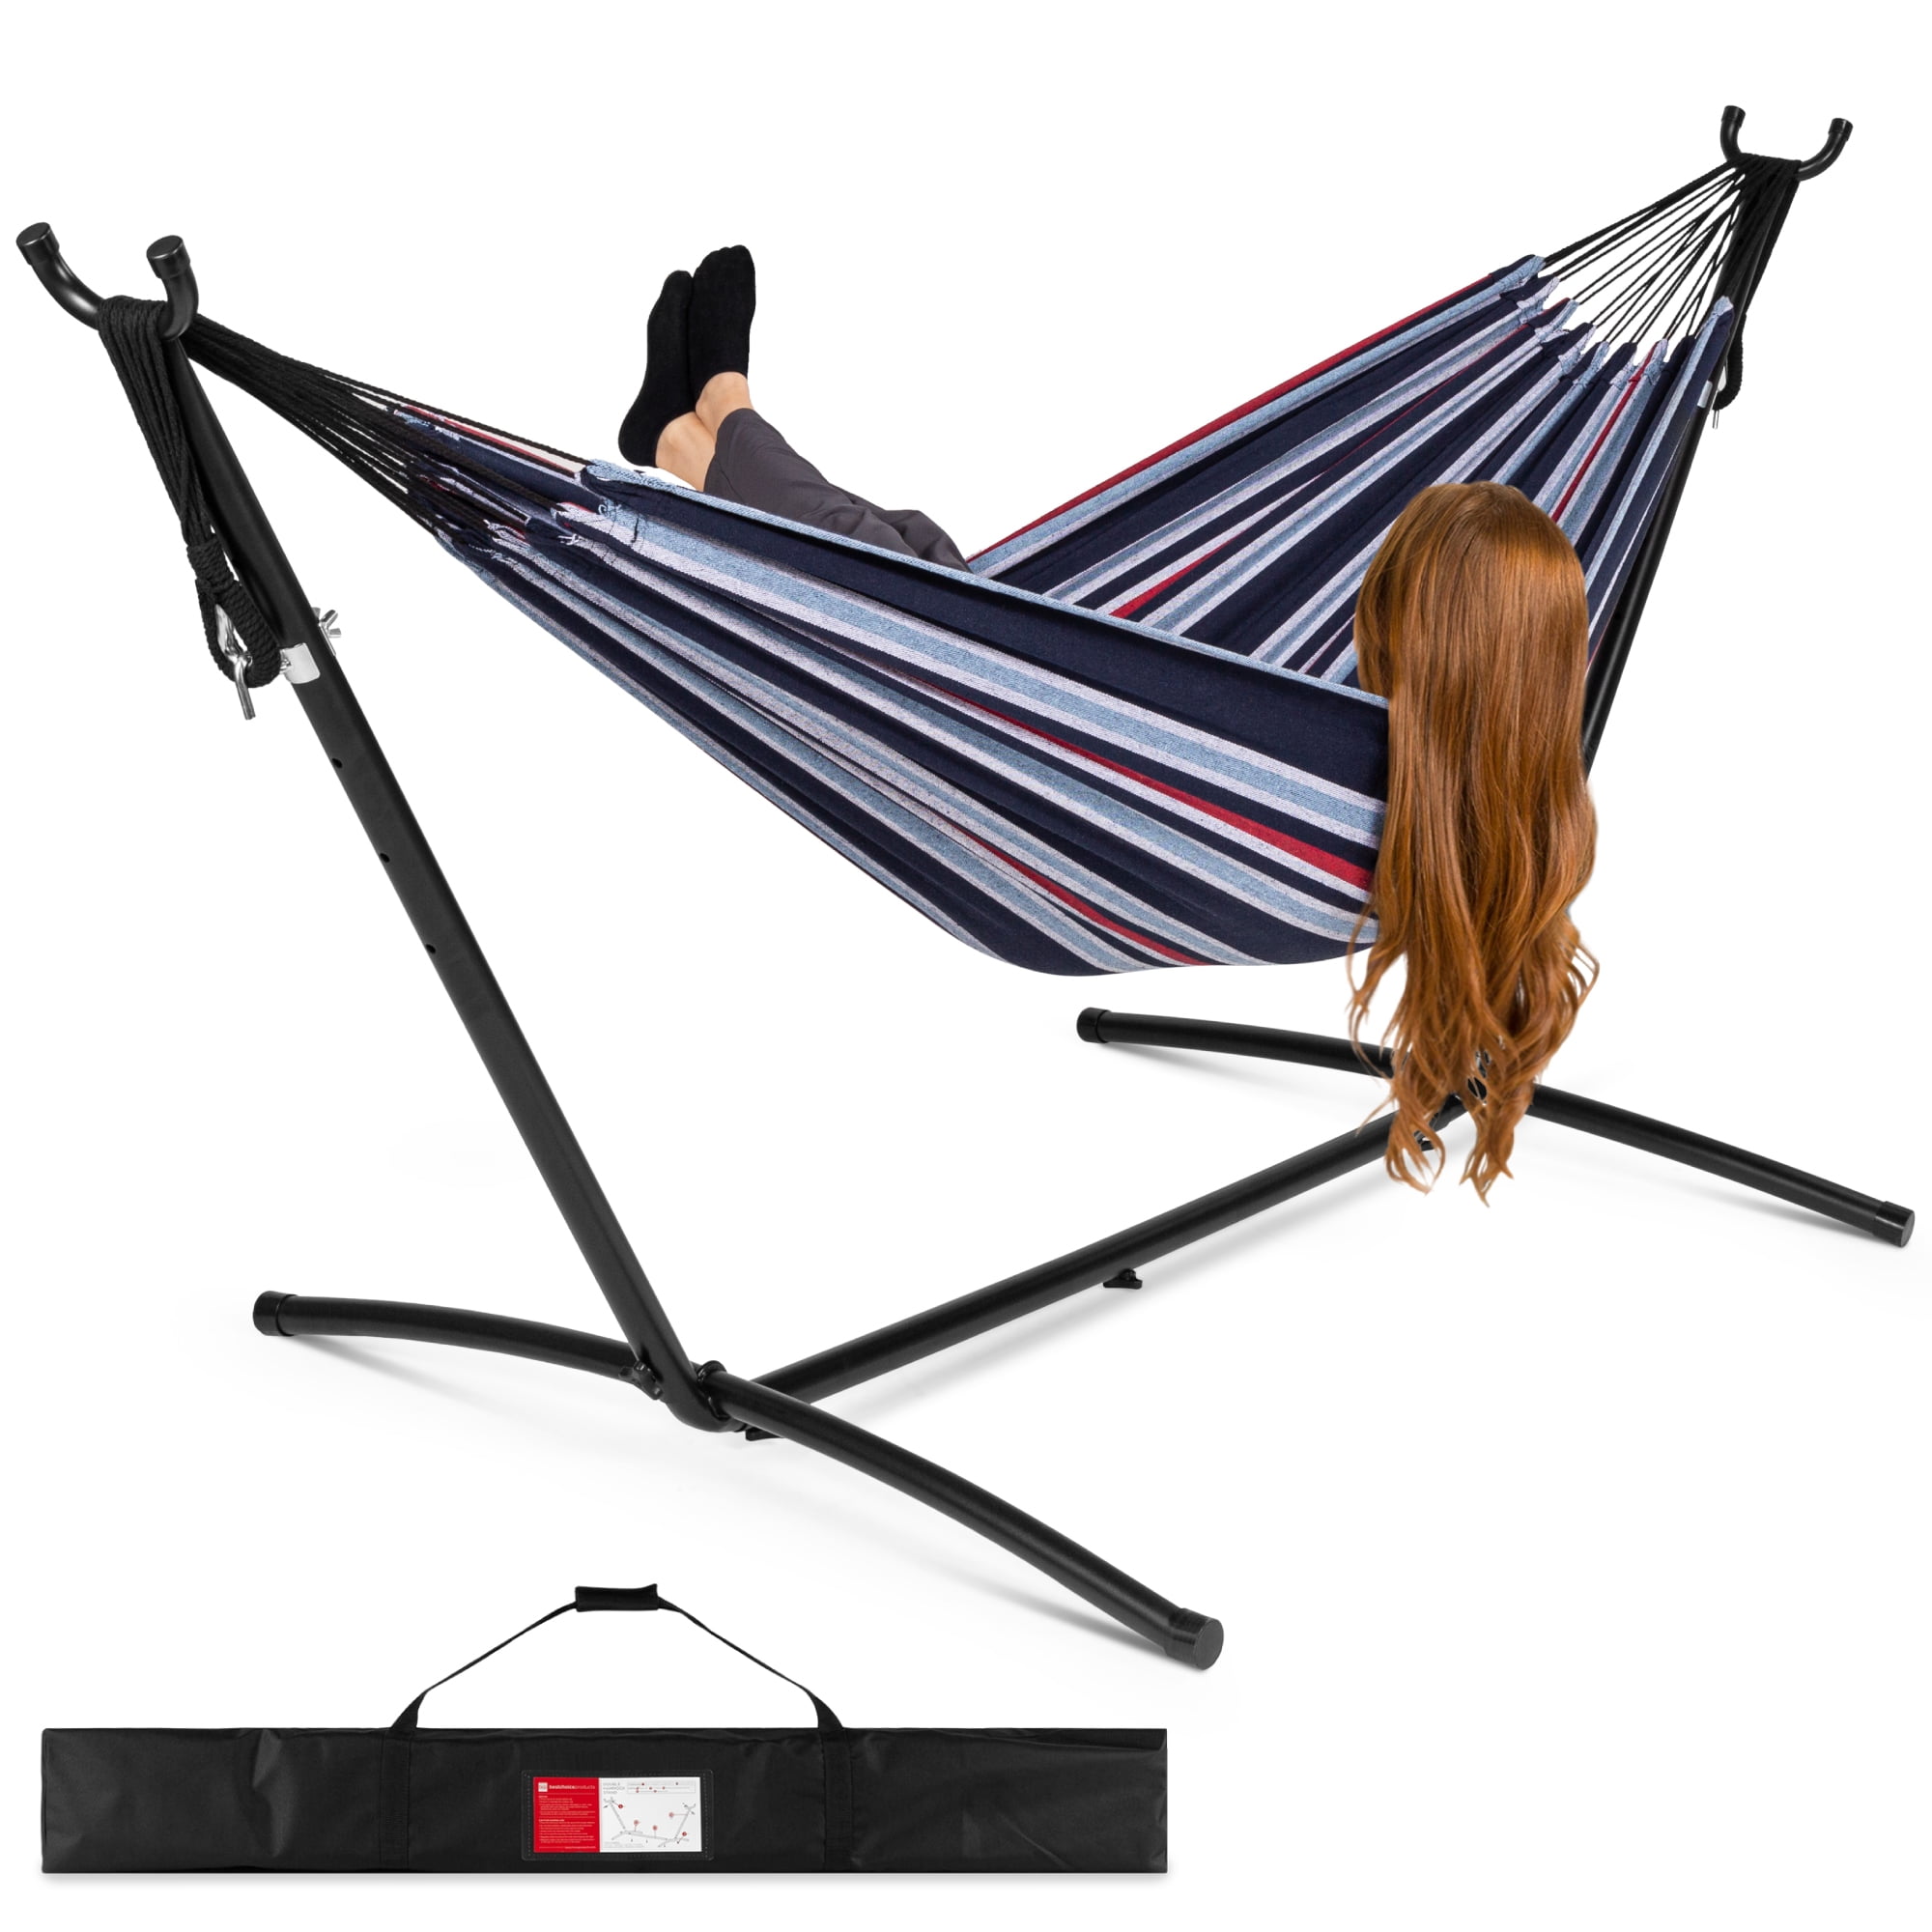 Double hammock Swing Carrying Bag Included 2 Person Brazilian Style Hammock for Garden Indoor and Outdoor Vanfree Camping Hammock Portable for Travel Vacation 